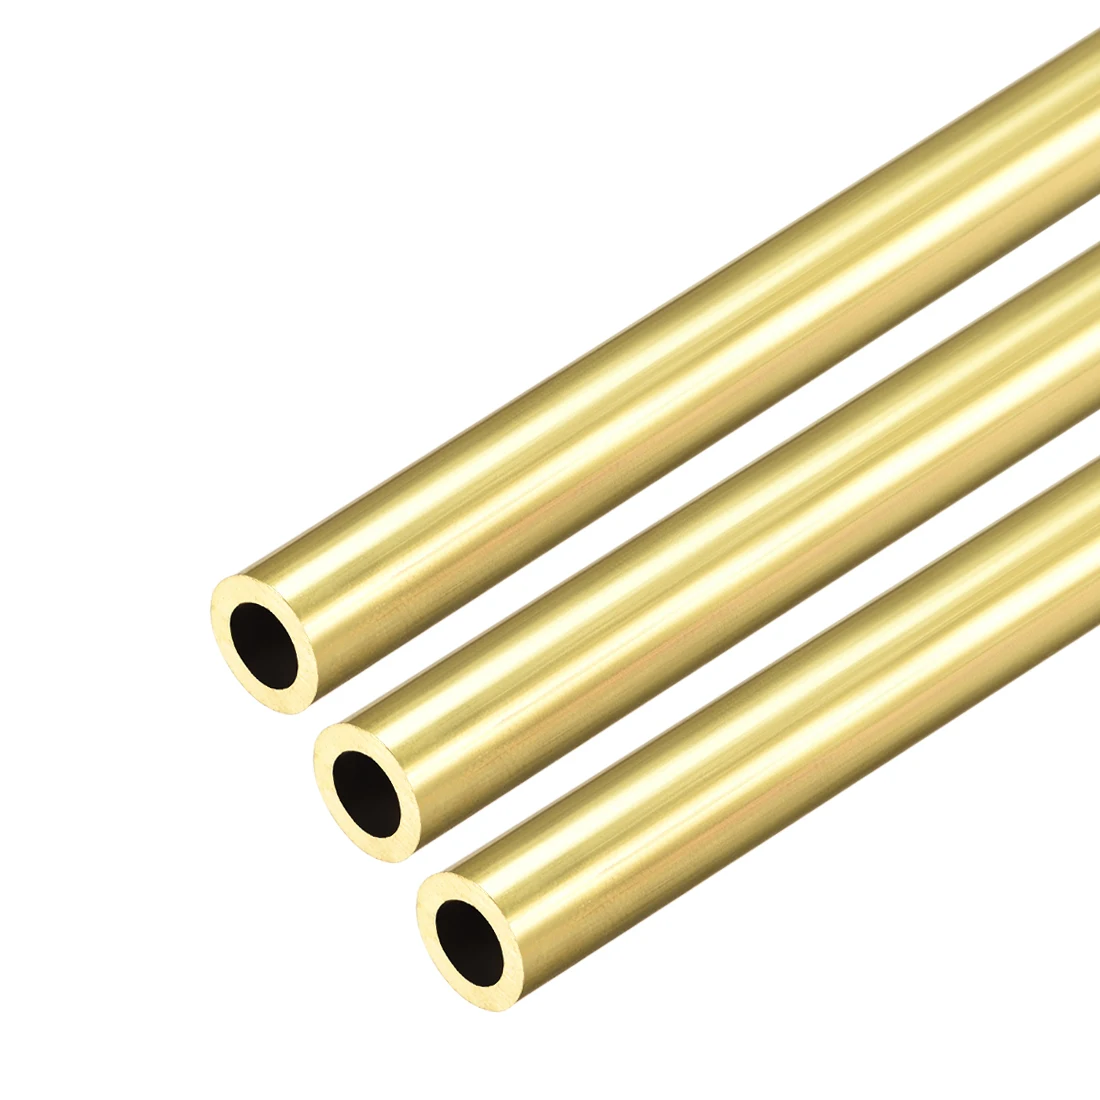 uxcell 4PCS 1.5mm x 2mm x 500mm Brass Pipe Tube Round Bar Rod for RC Boat 